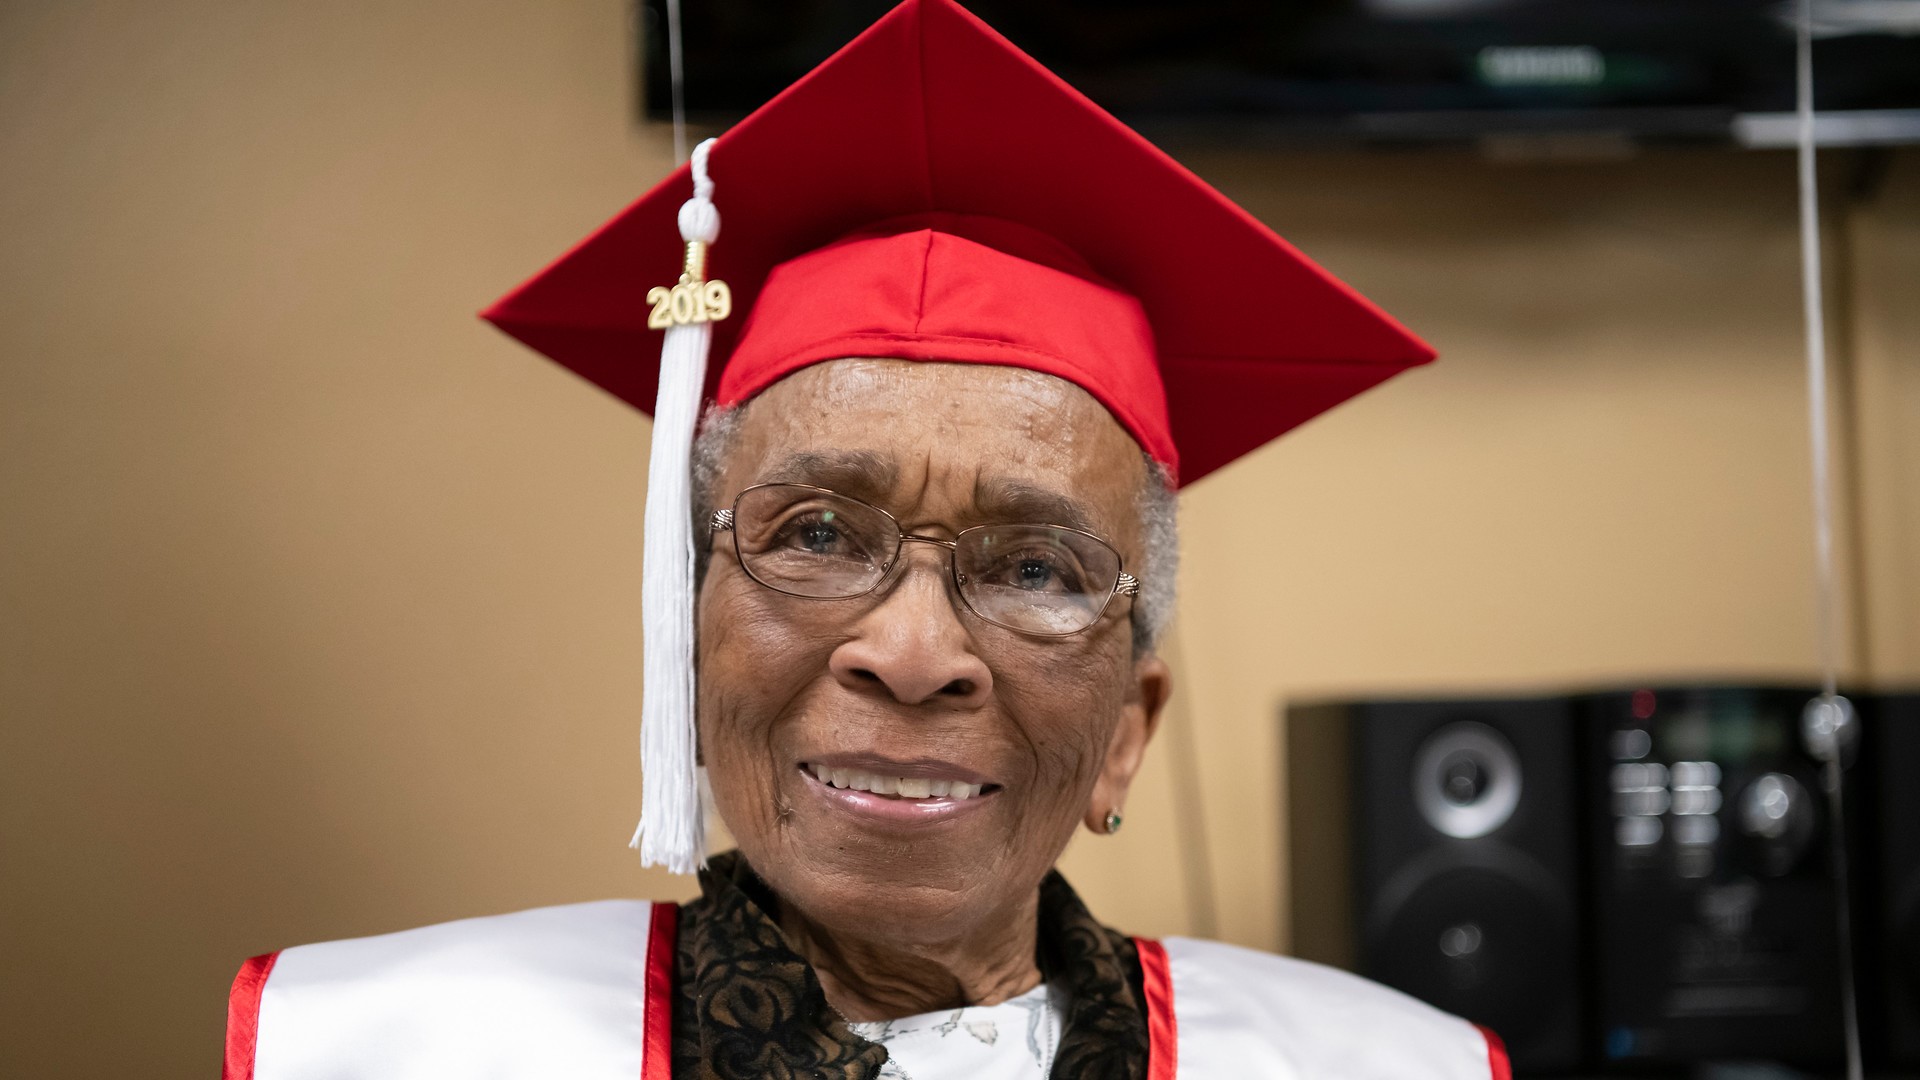 At age 99, World War II veteran, Elizabeth Barker Johnson, who graduated from WSSU in 1949, will finally get to walk across the state. She was unable to attend her commencement 70 years ago.